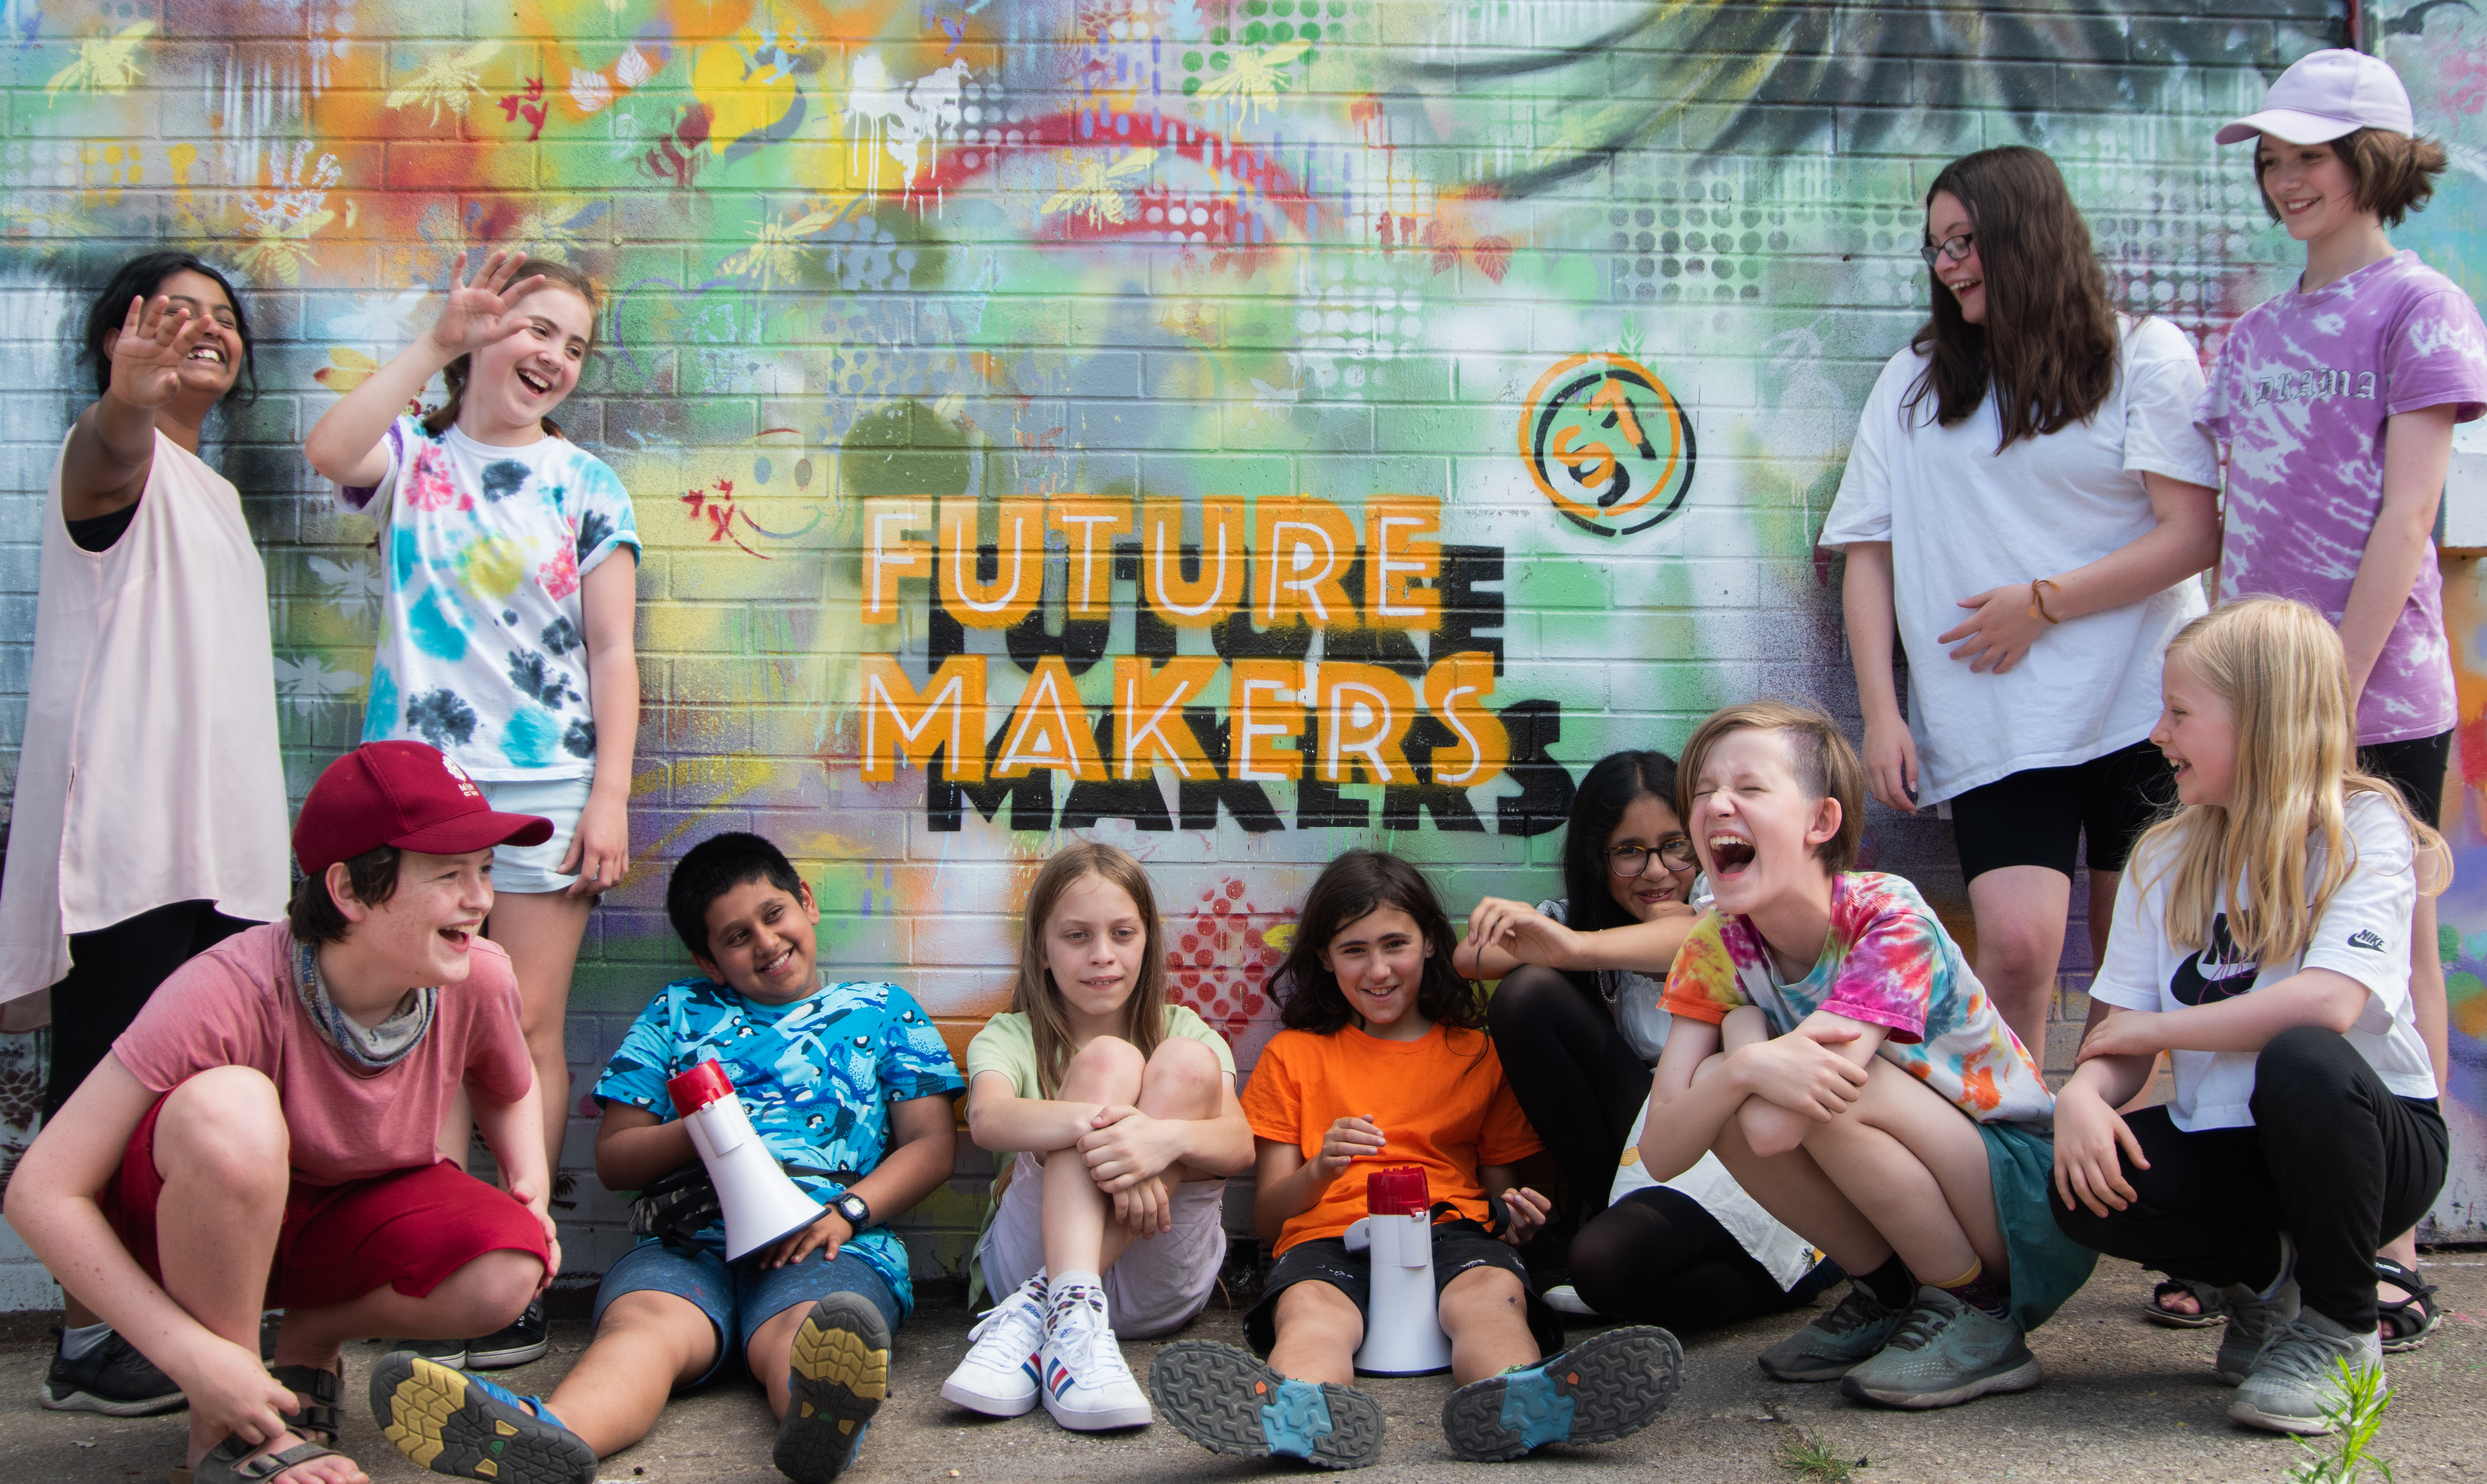 11 young people sat and stood against a wall of graffiti, the logo for "Future Makers S7" at the centre